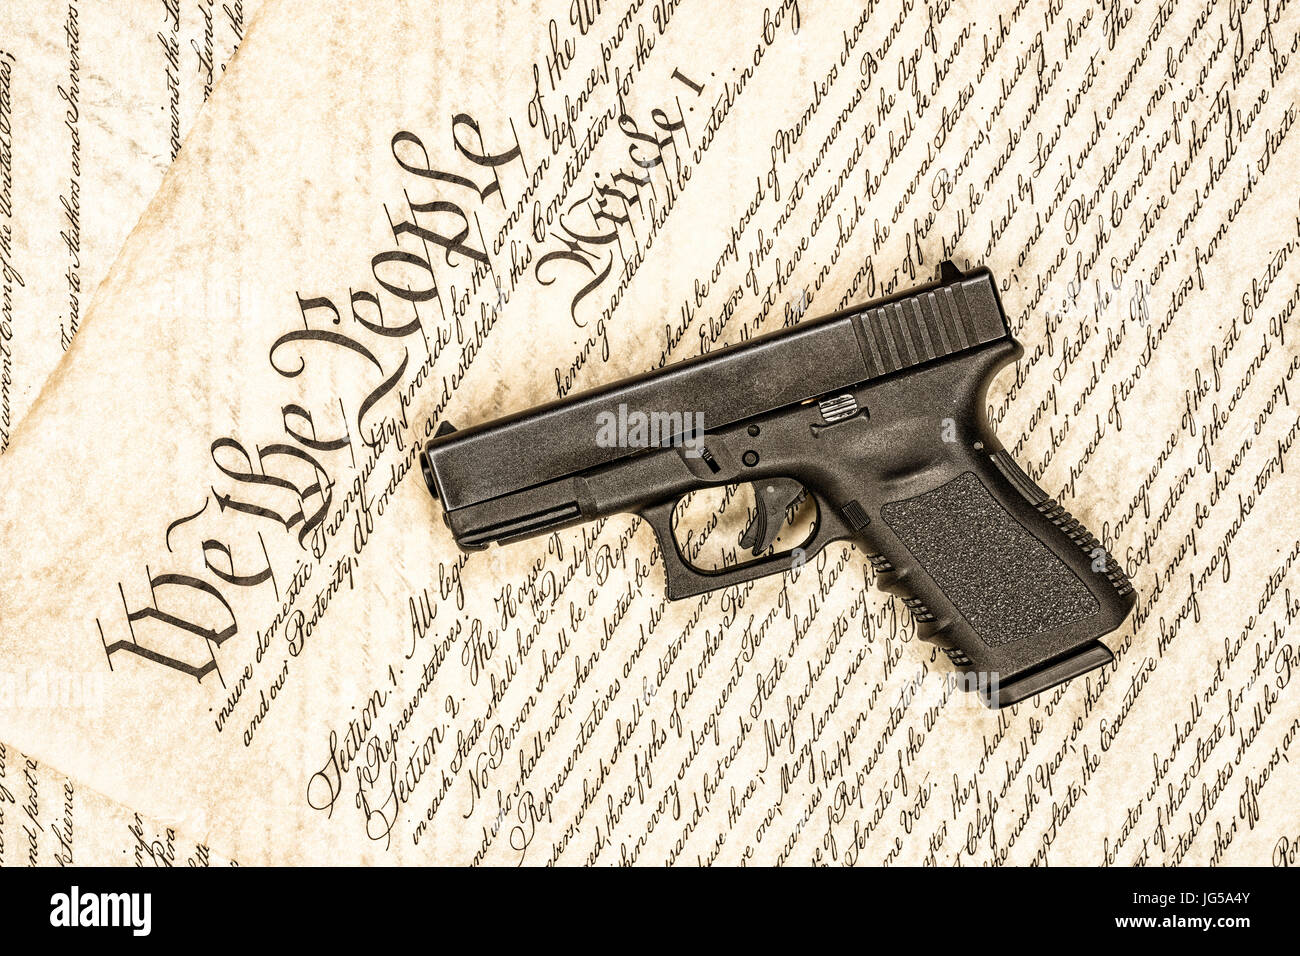 A handgun symbolizing gun rights while framed against the United States constitution. Stock Photo